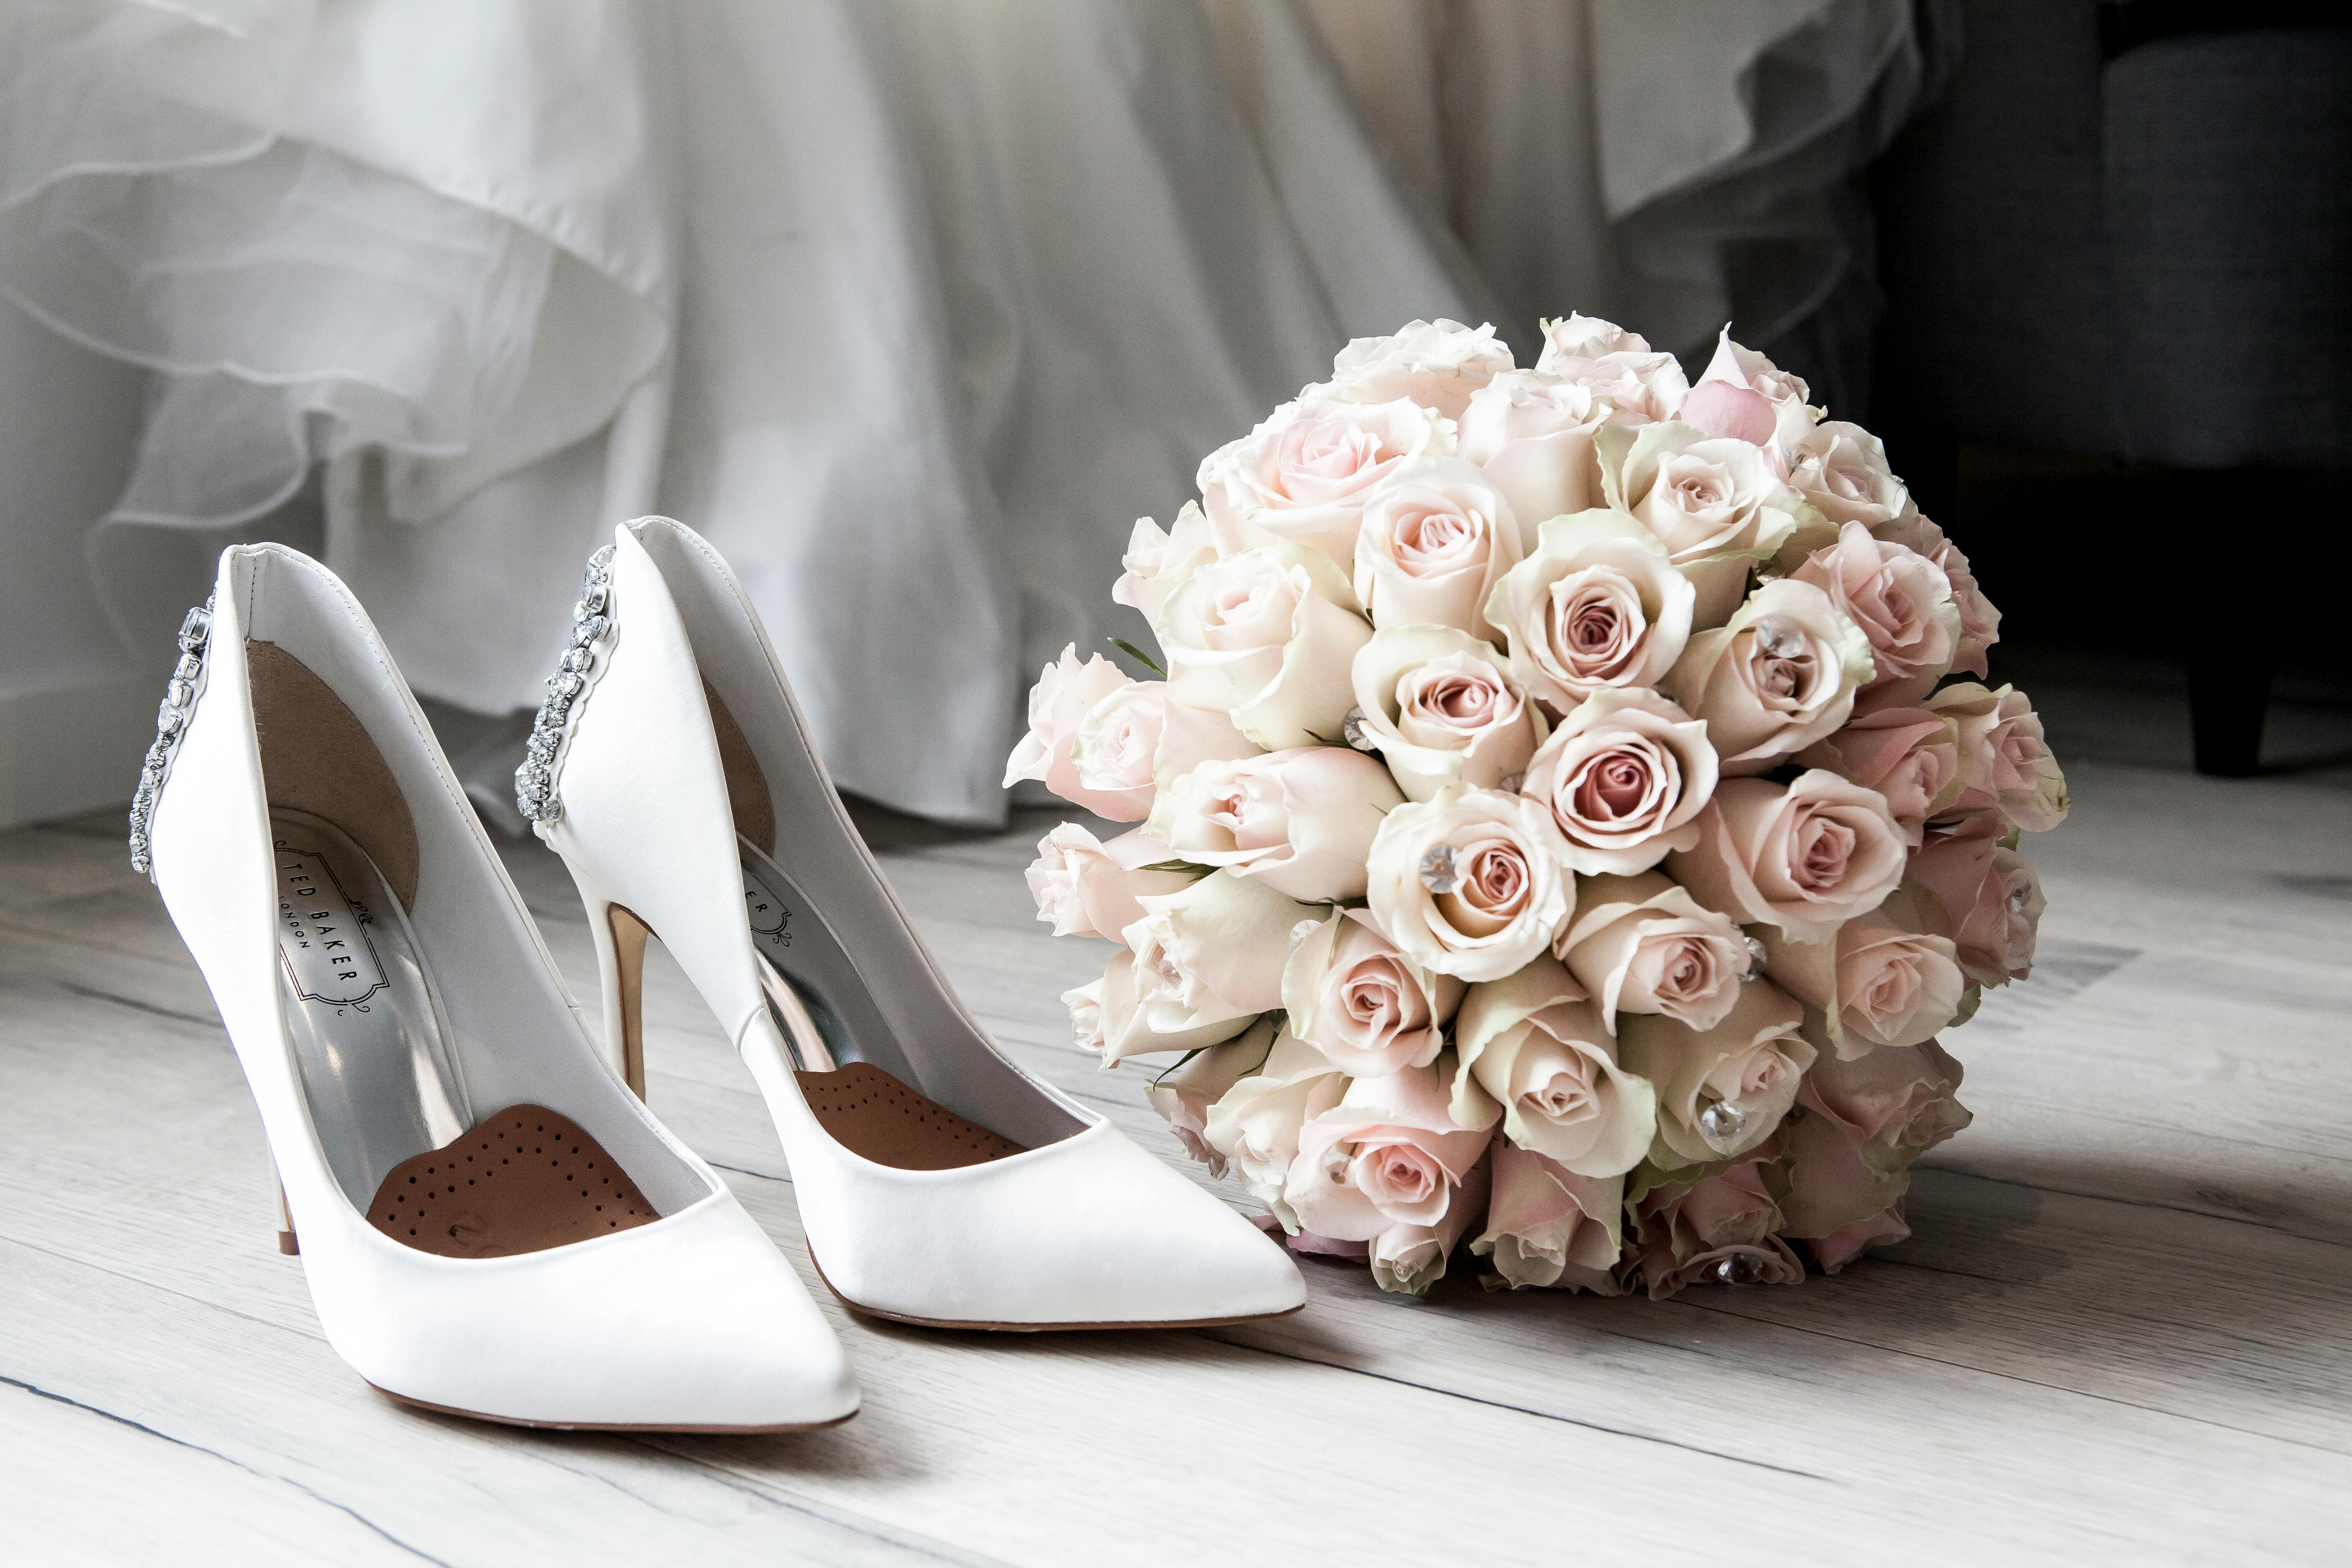 Heels and a bouquet | Source: Pexels